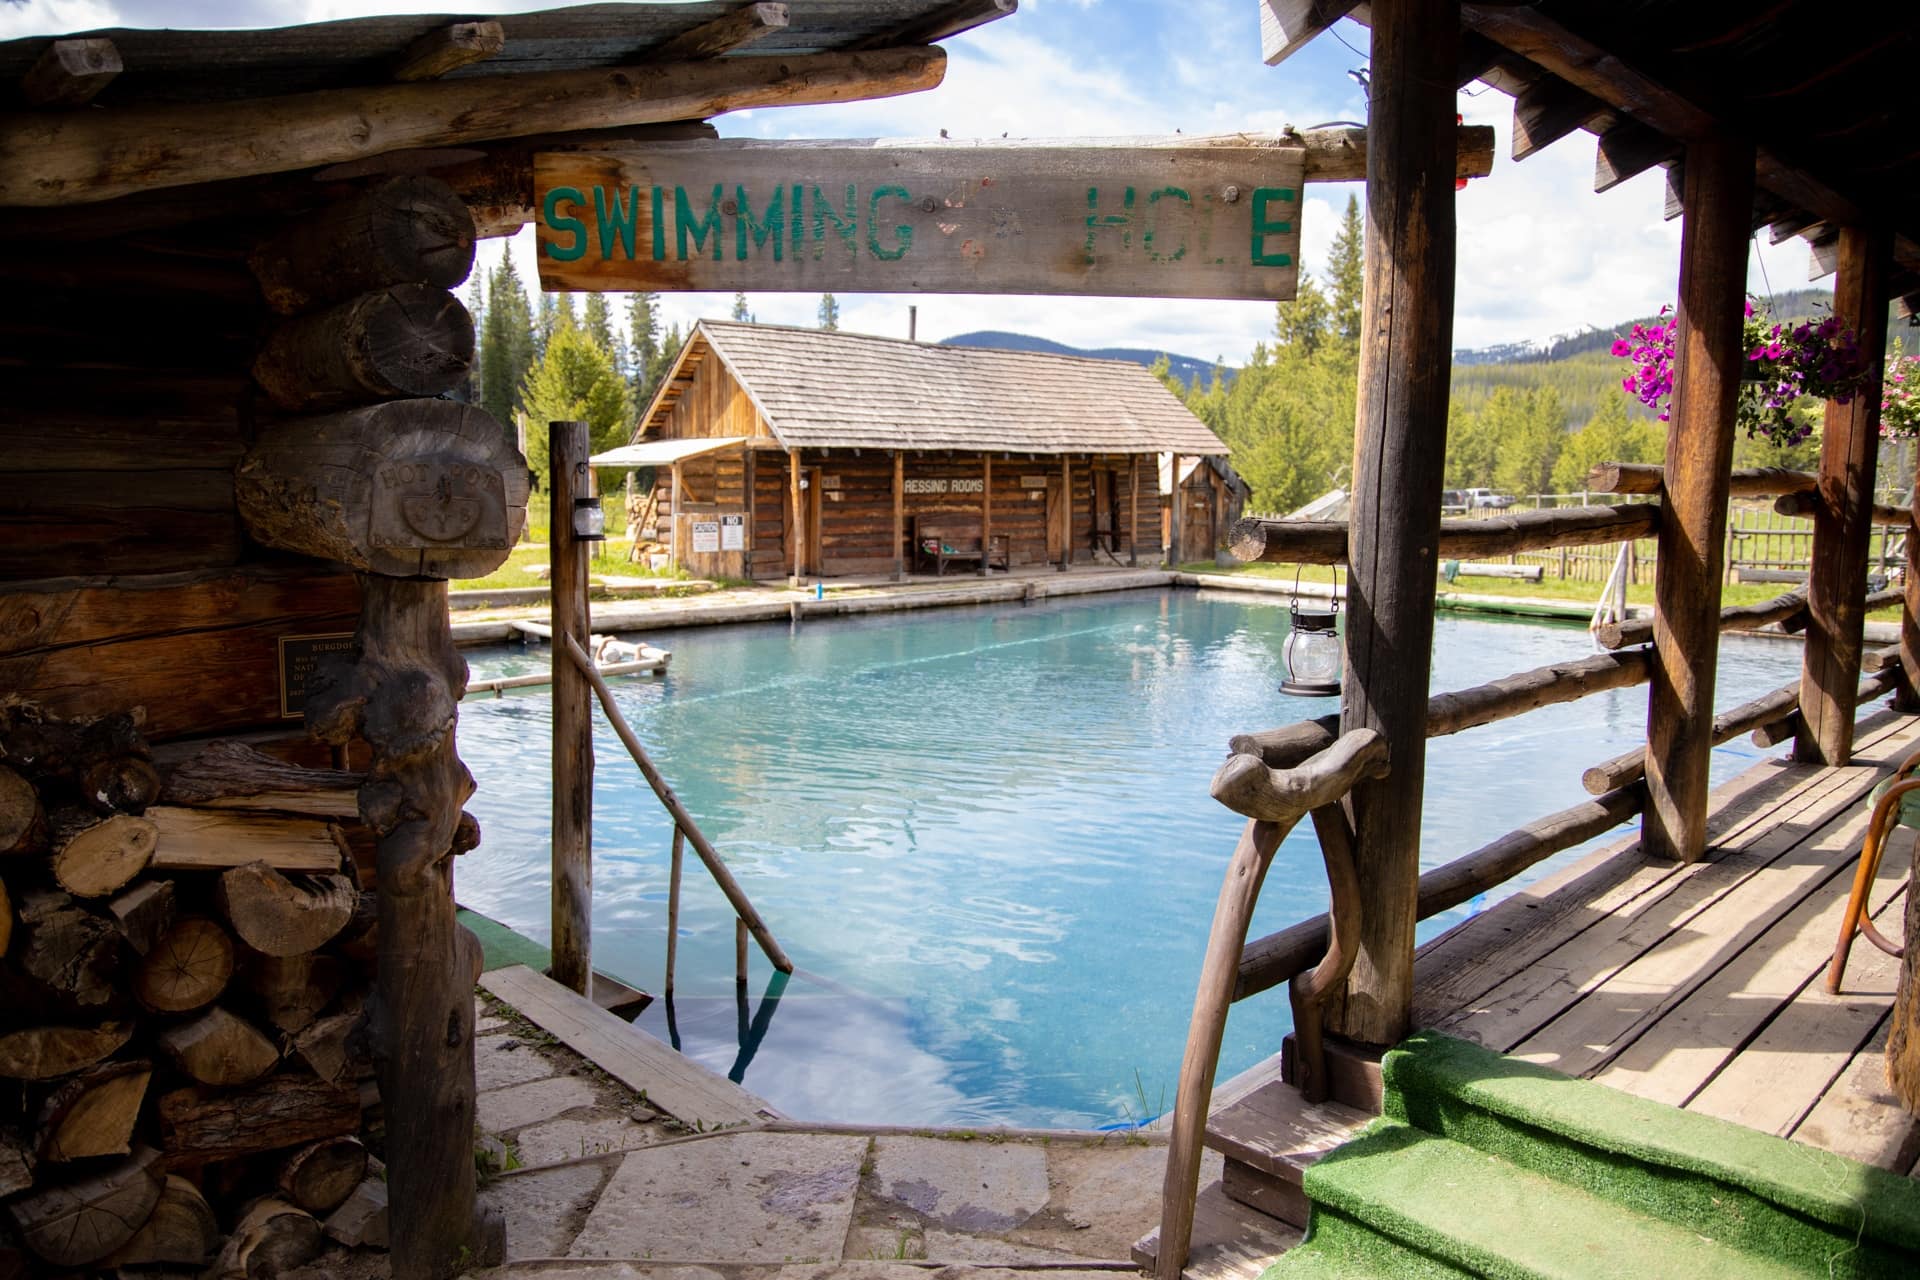 A large hot spring pool at Burgdorf hot springs resort in Idaho. Log cabin buildings surround the pool and sign saying "swimming hole" hung over entrance into pool